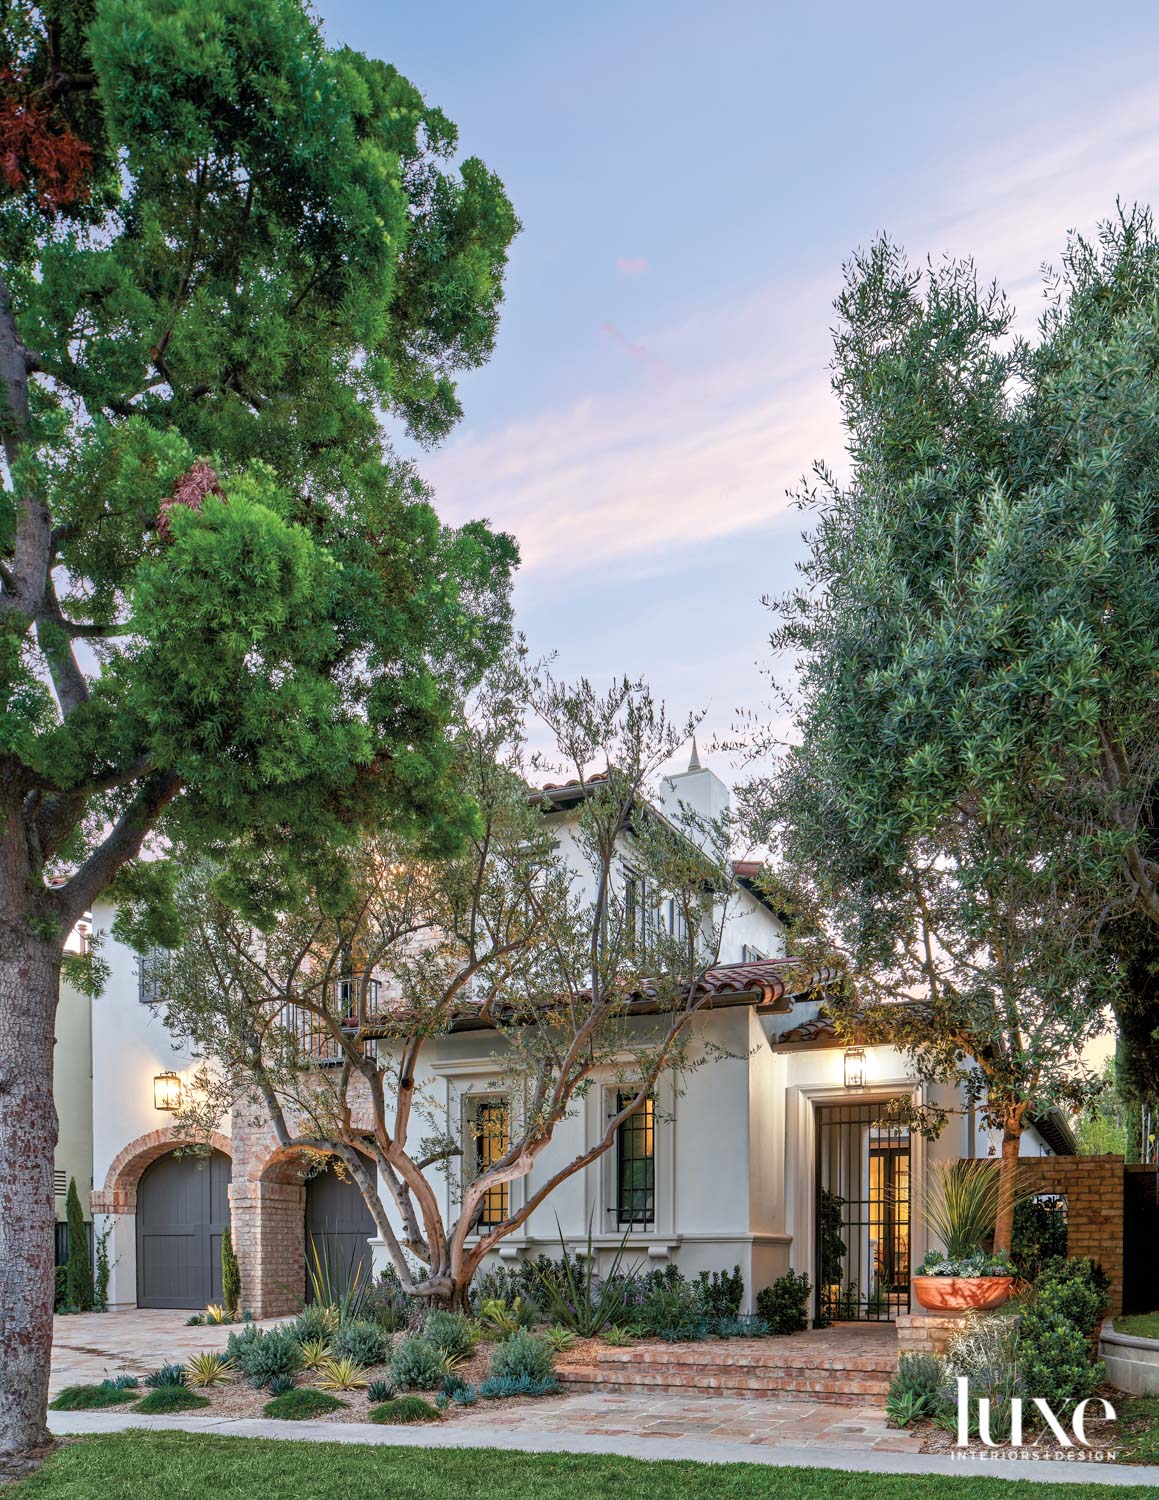 From Tuscan To Timeless: Behind An Irvine Home’s Much-Needed Update